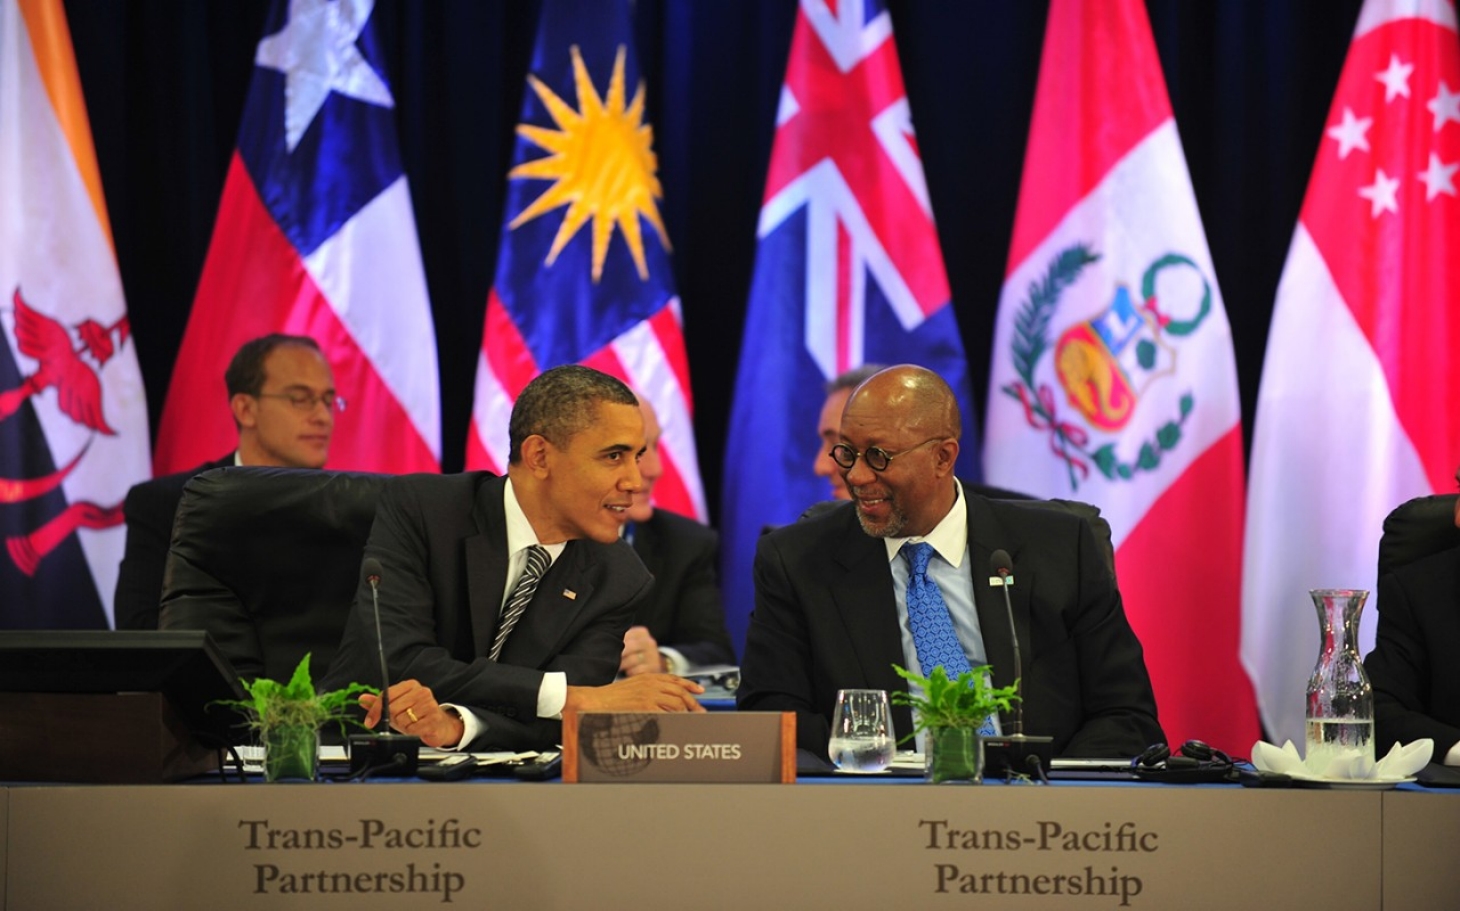 http://americaprod.aljazeera.com/content/ajam/opinions/2015/4/under-obama-trade-deal-disputes-would-be-settled-outside-us-judicial-system/jcr:content/headlineImage.adapt.1460.high.obama_tpp_041015.1428936770734.jpg